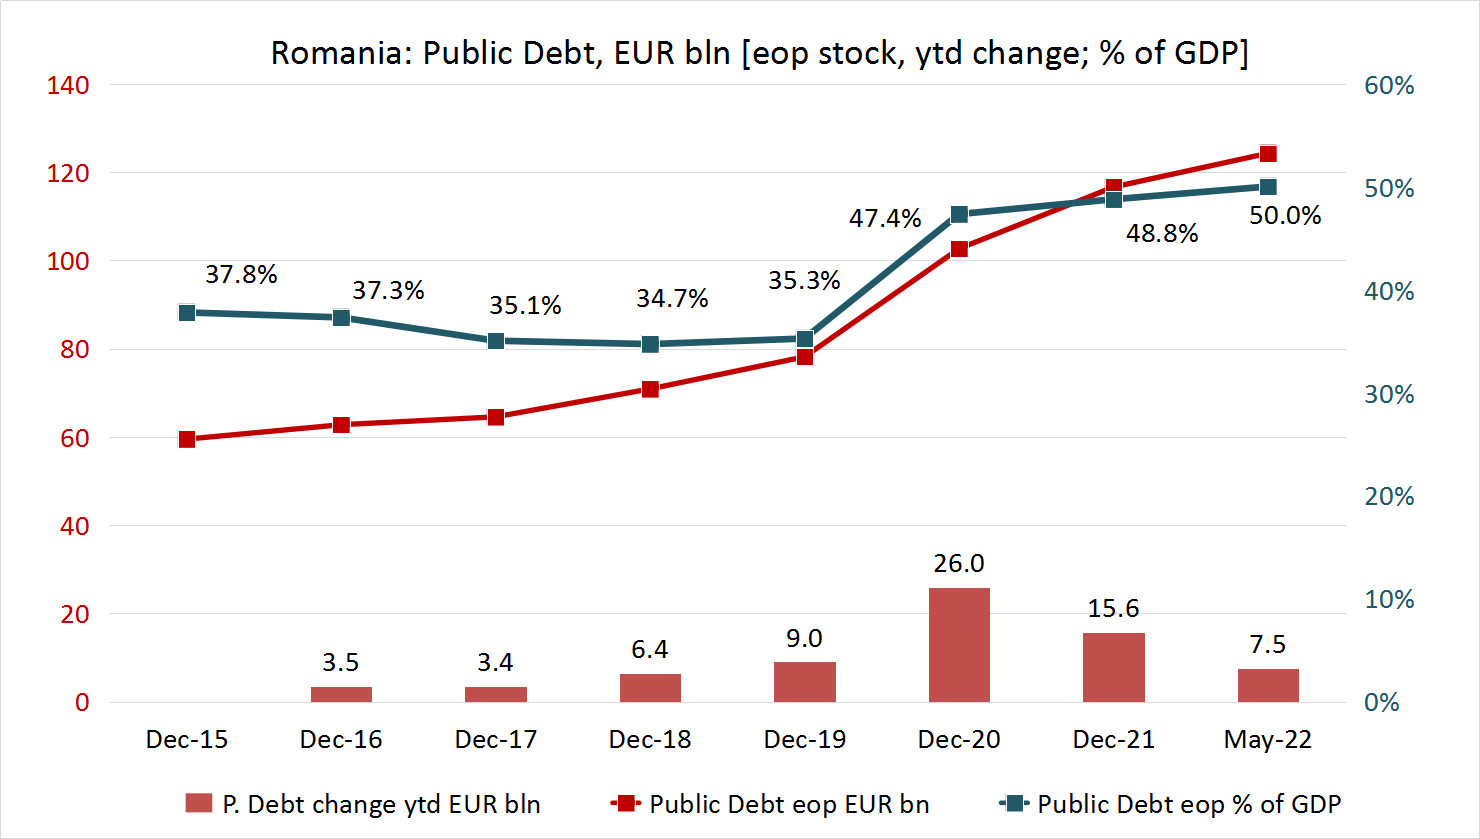 Romania’s public debt hits 50% of GDP after May Eurobond issue